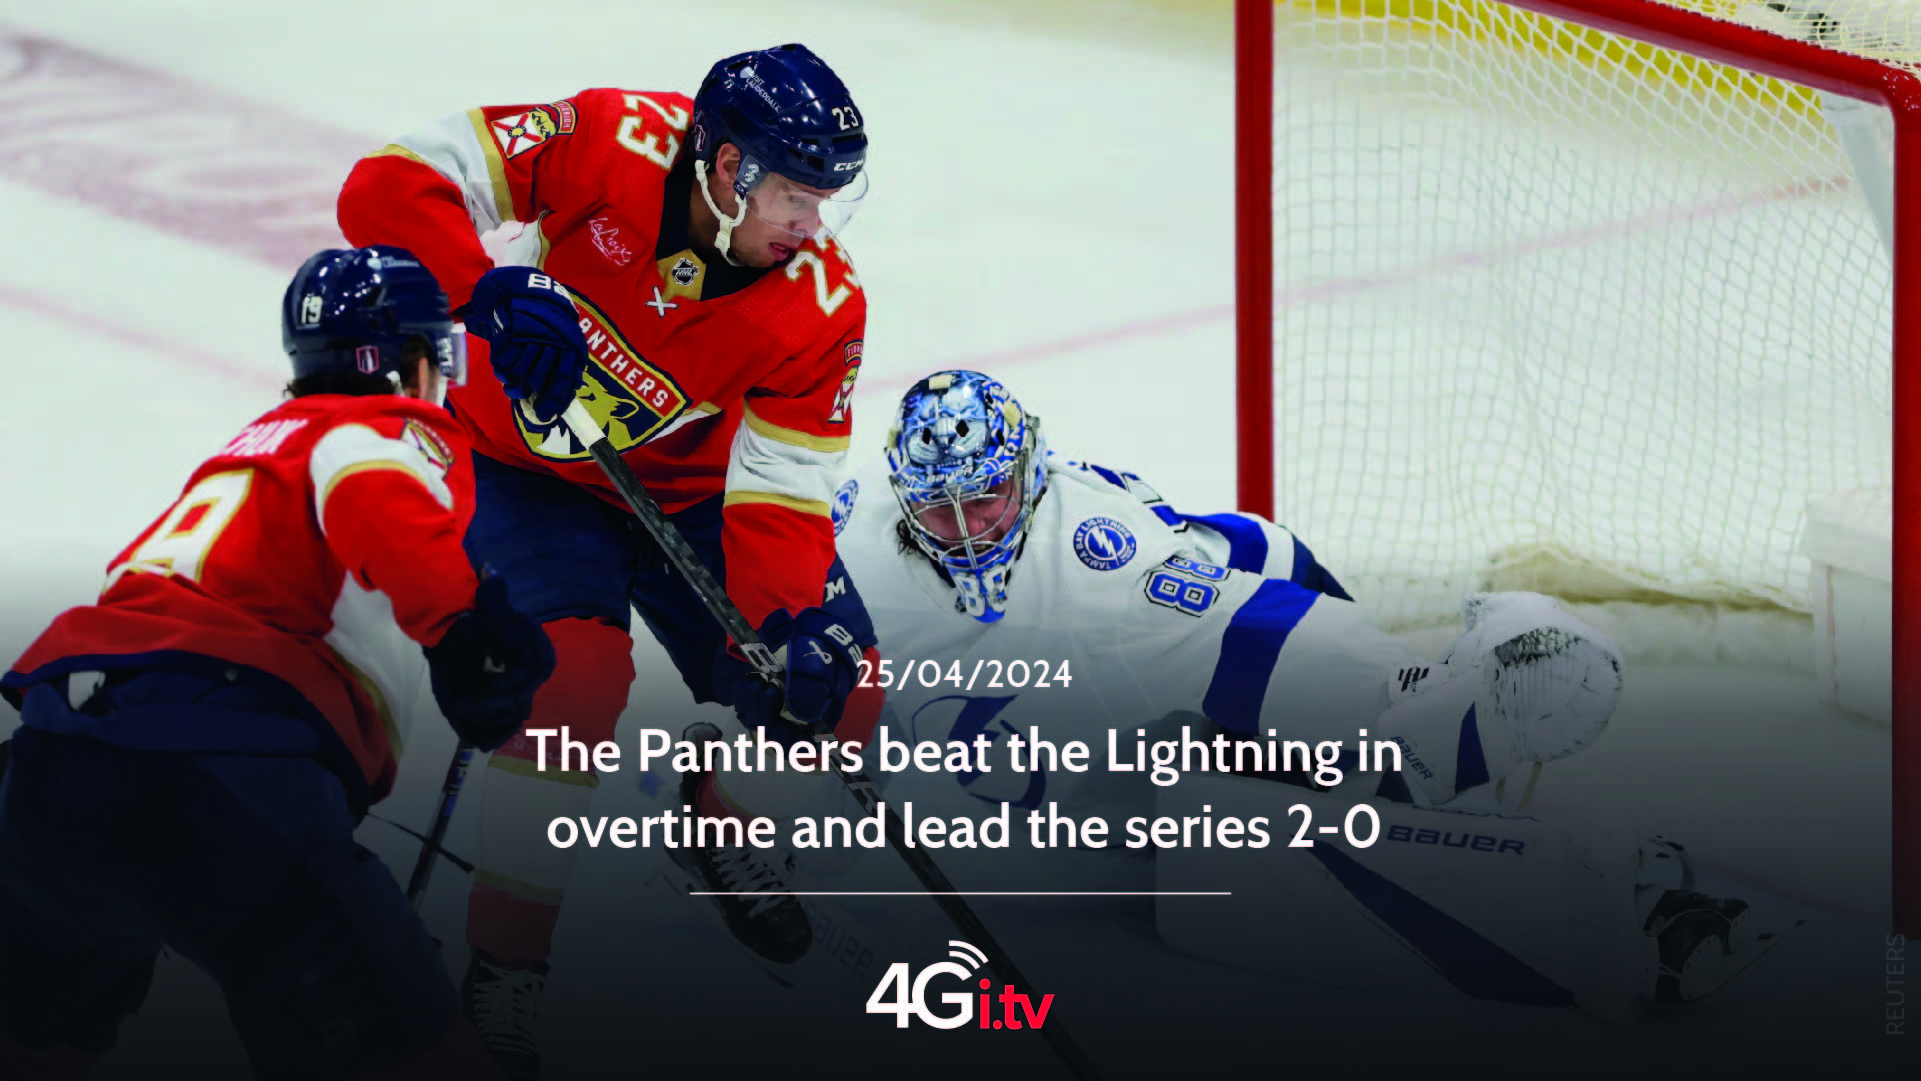 Lesen Sie mehr über den Artikel The Panthers beat the Lightning in overtime and lead the series 2-0